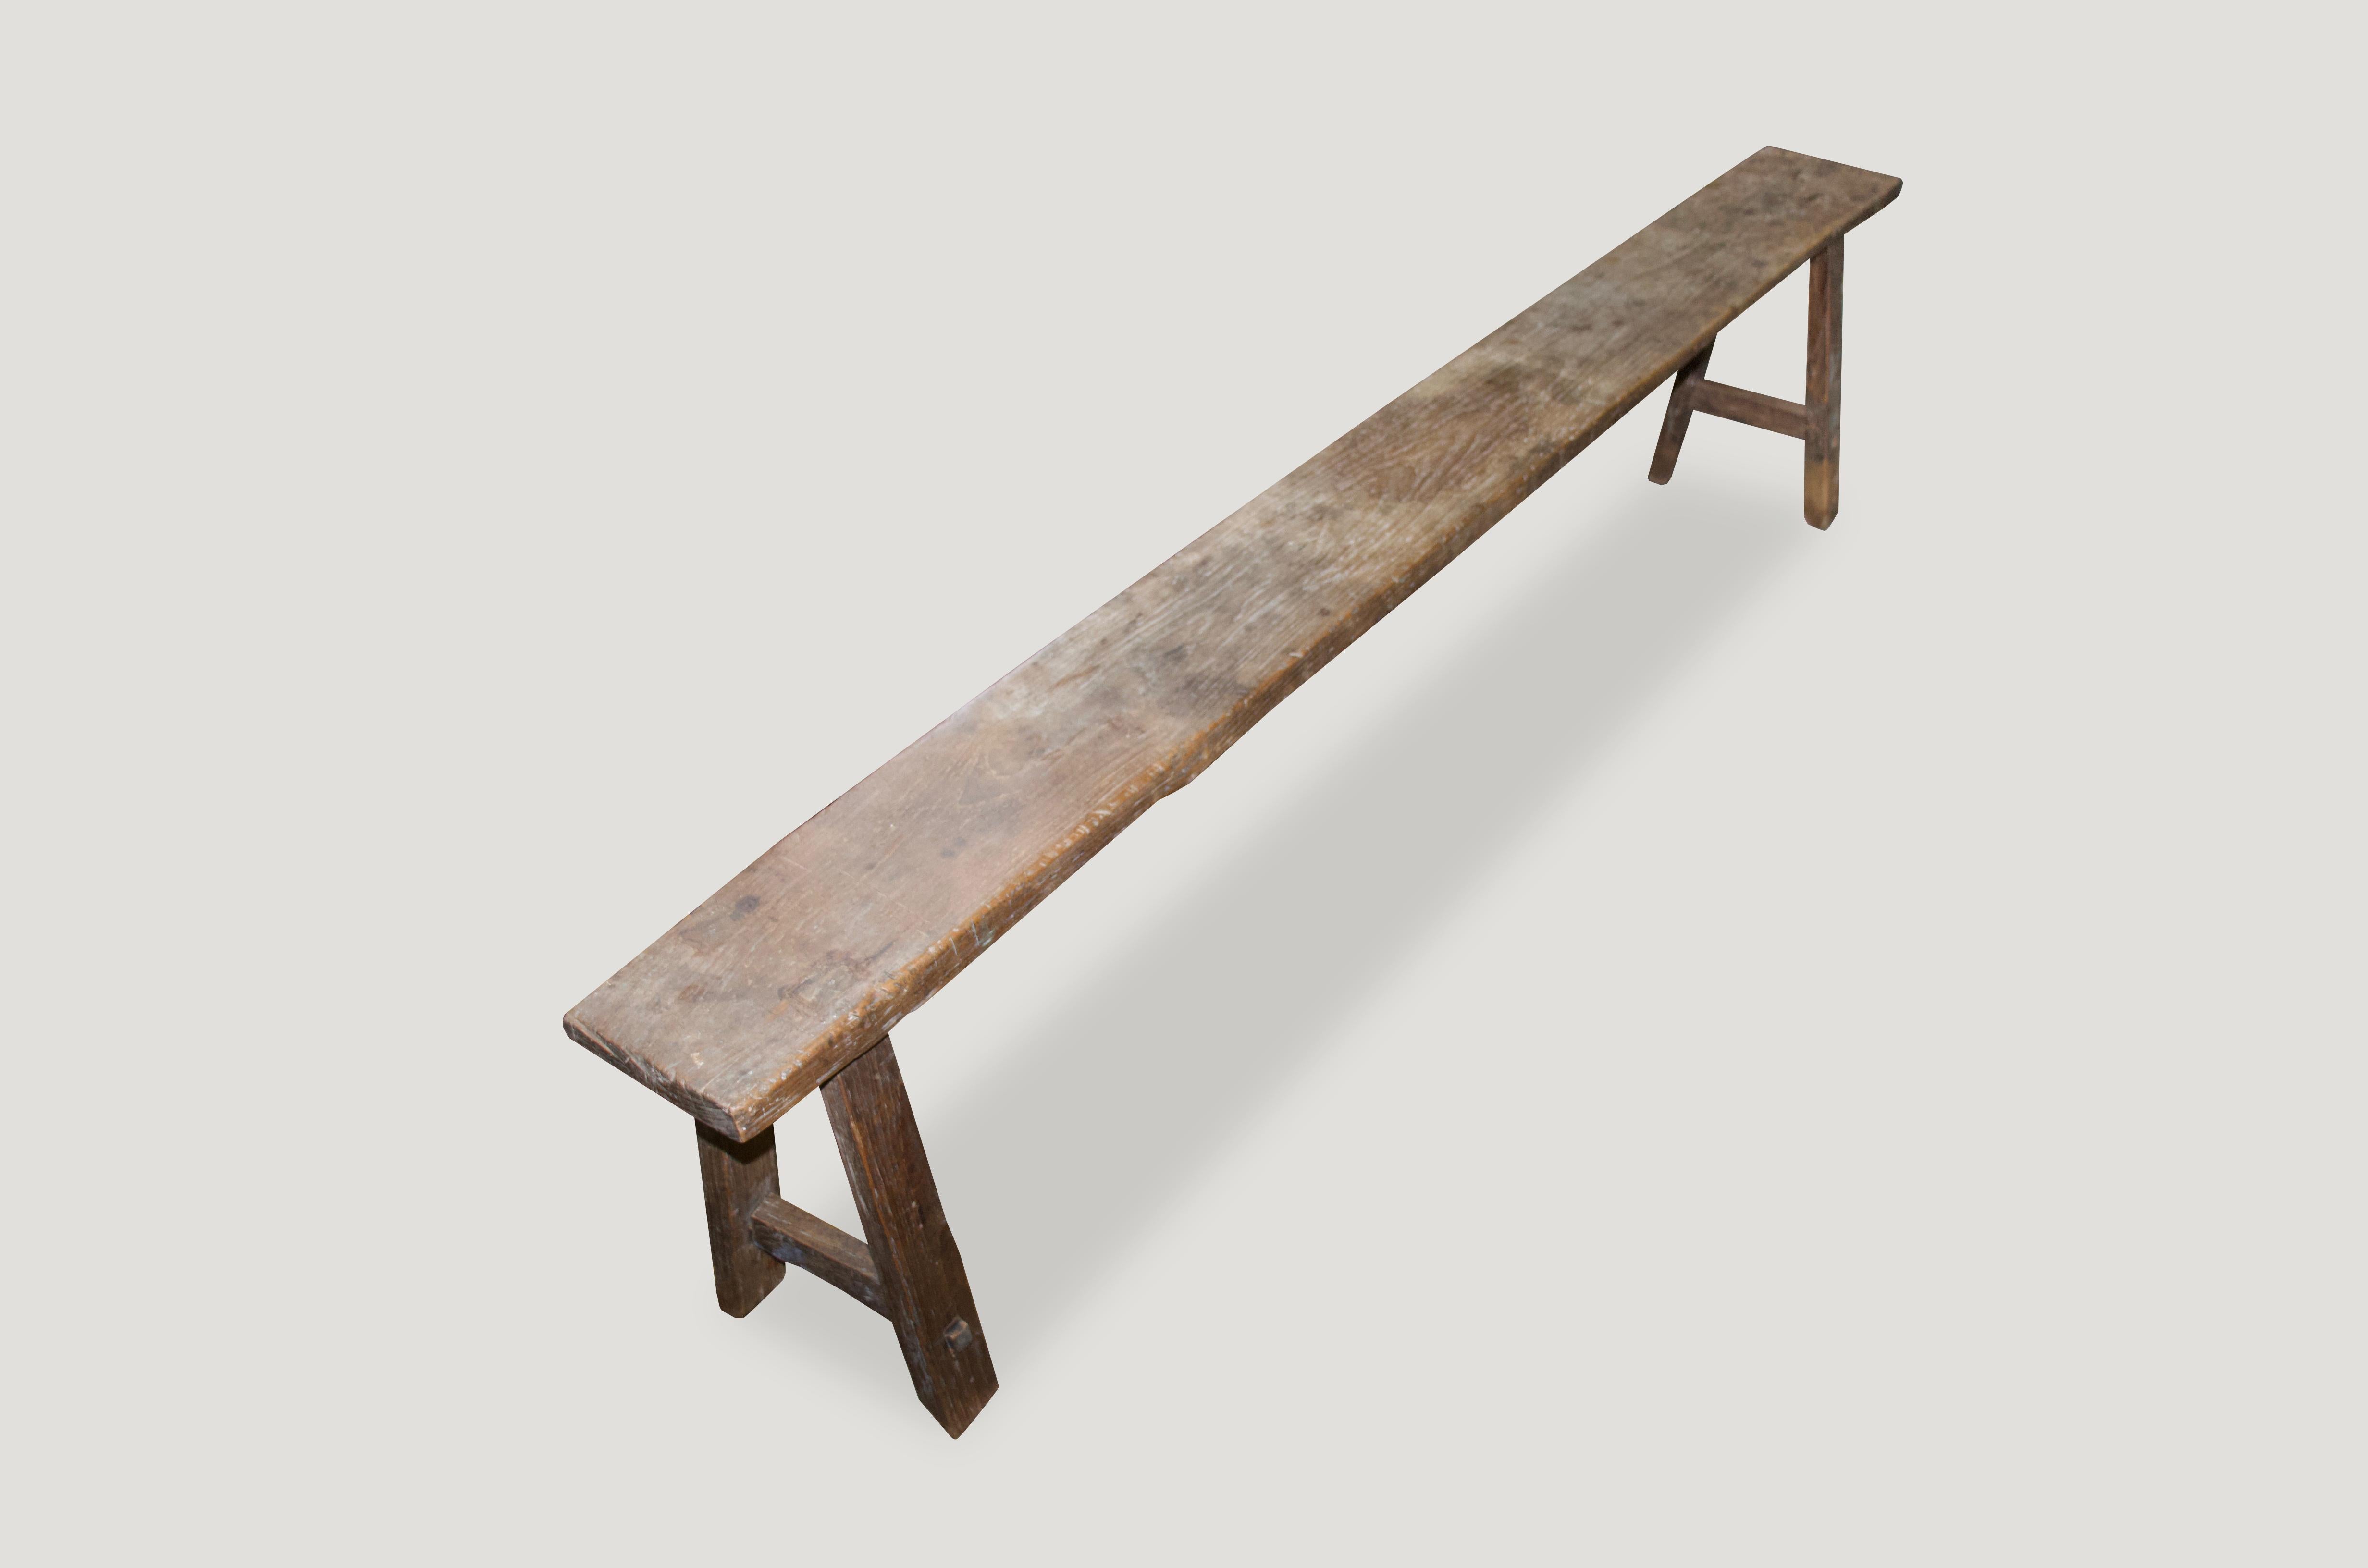 Antique hand carved teak bench with nice patina. This can also be used as a shelf. Great for inside or outside living.

This bench was sourced in the spirit of wabi-sabi, a Japanese philosophy that beauty can be found in imperfection and